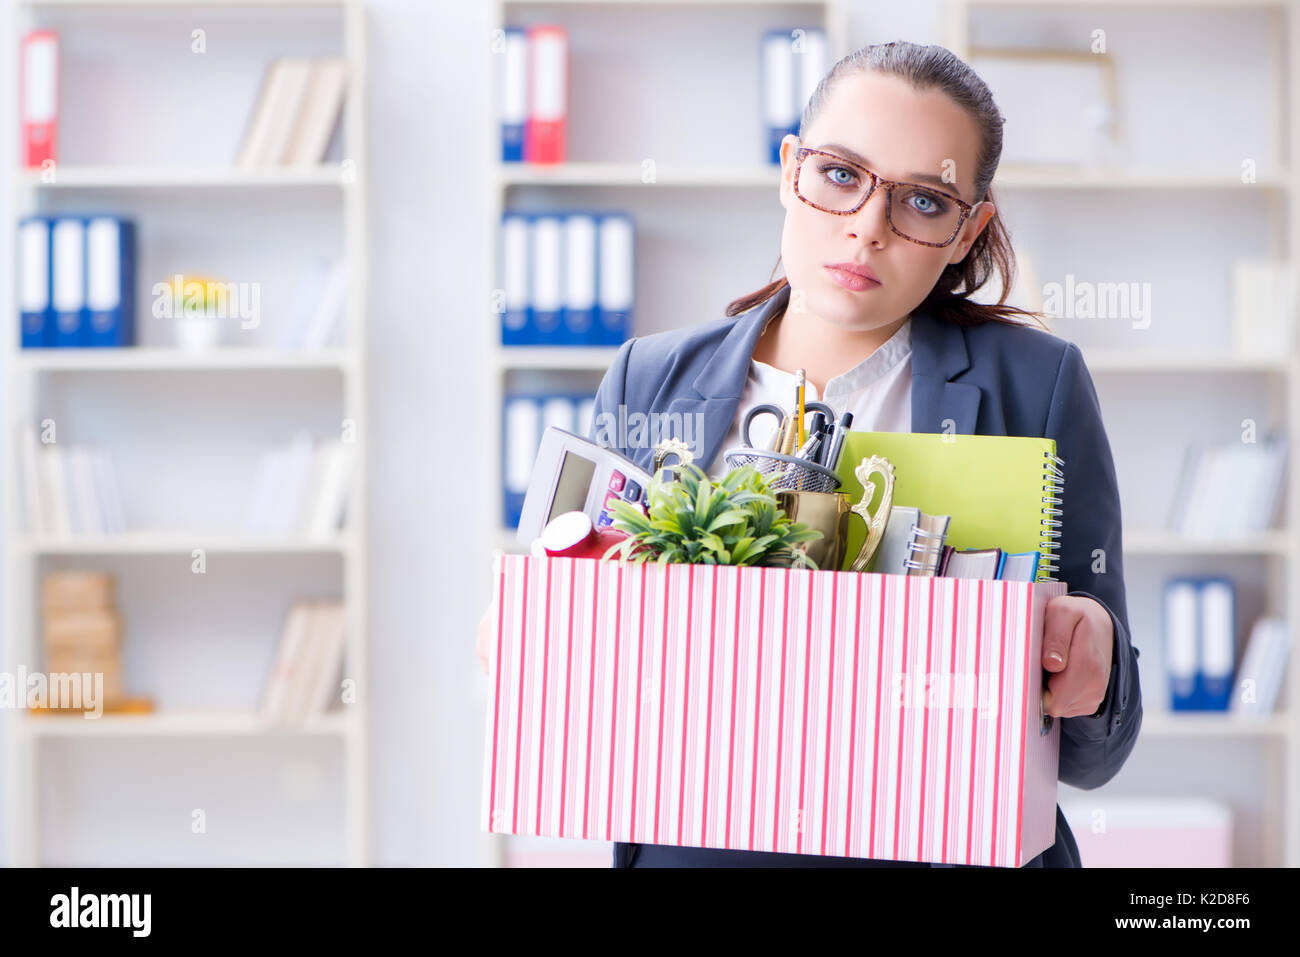 Businesswoman resigning from her job Stock Photo